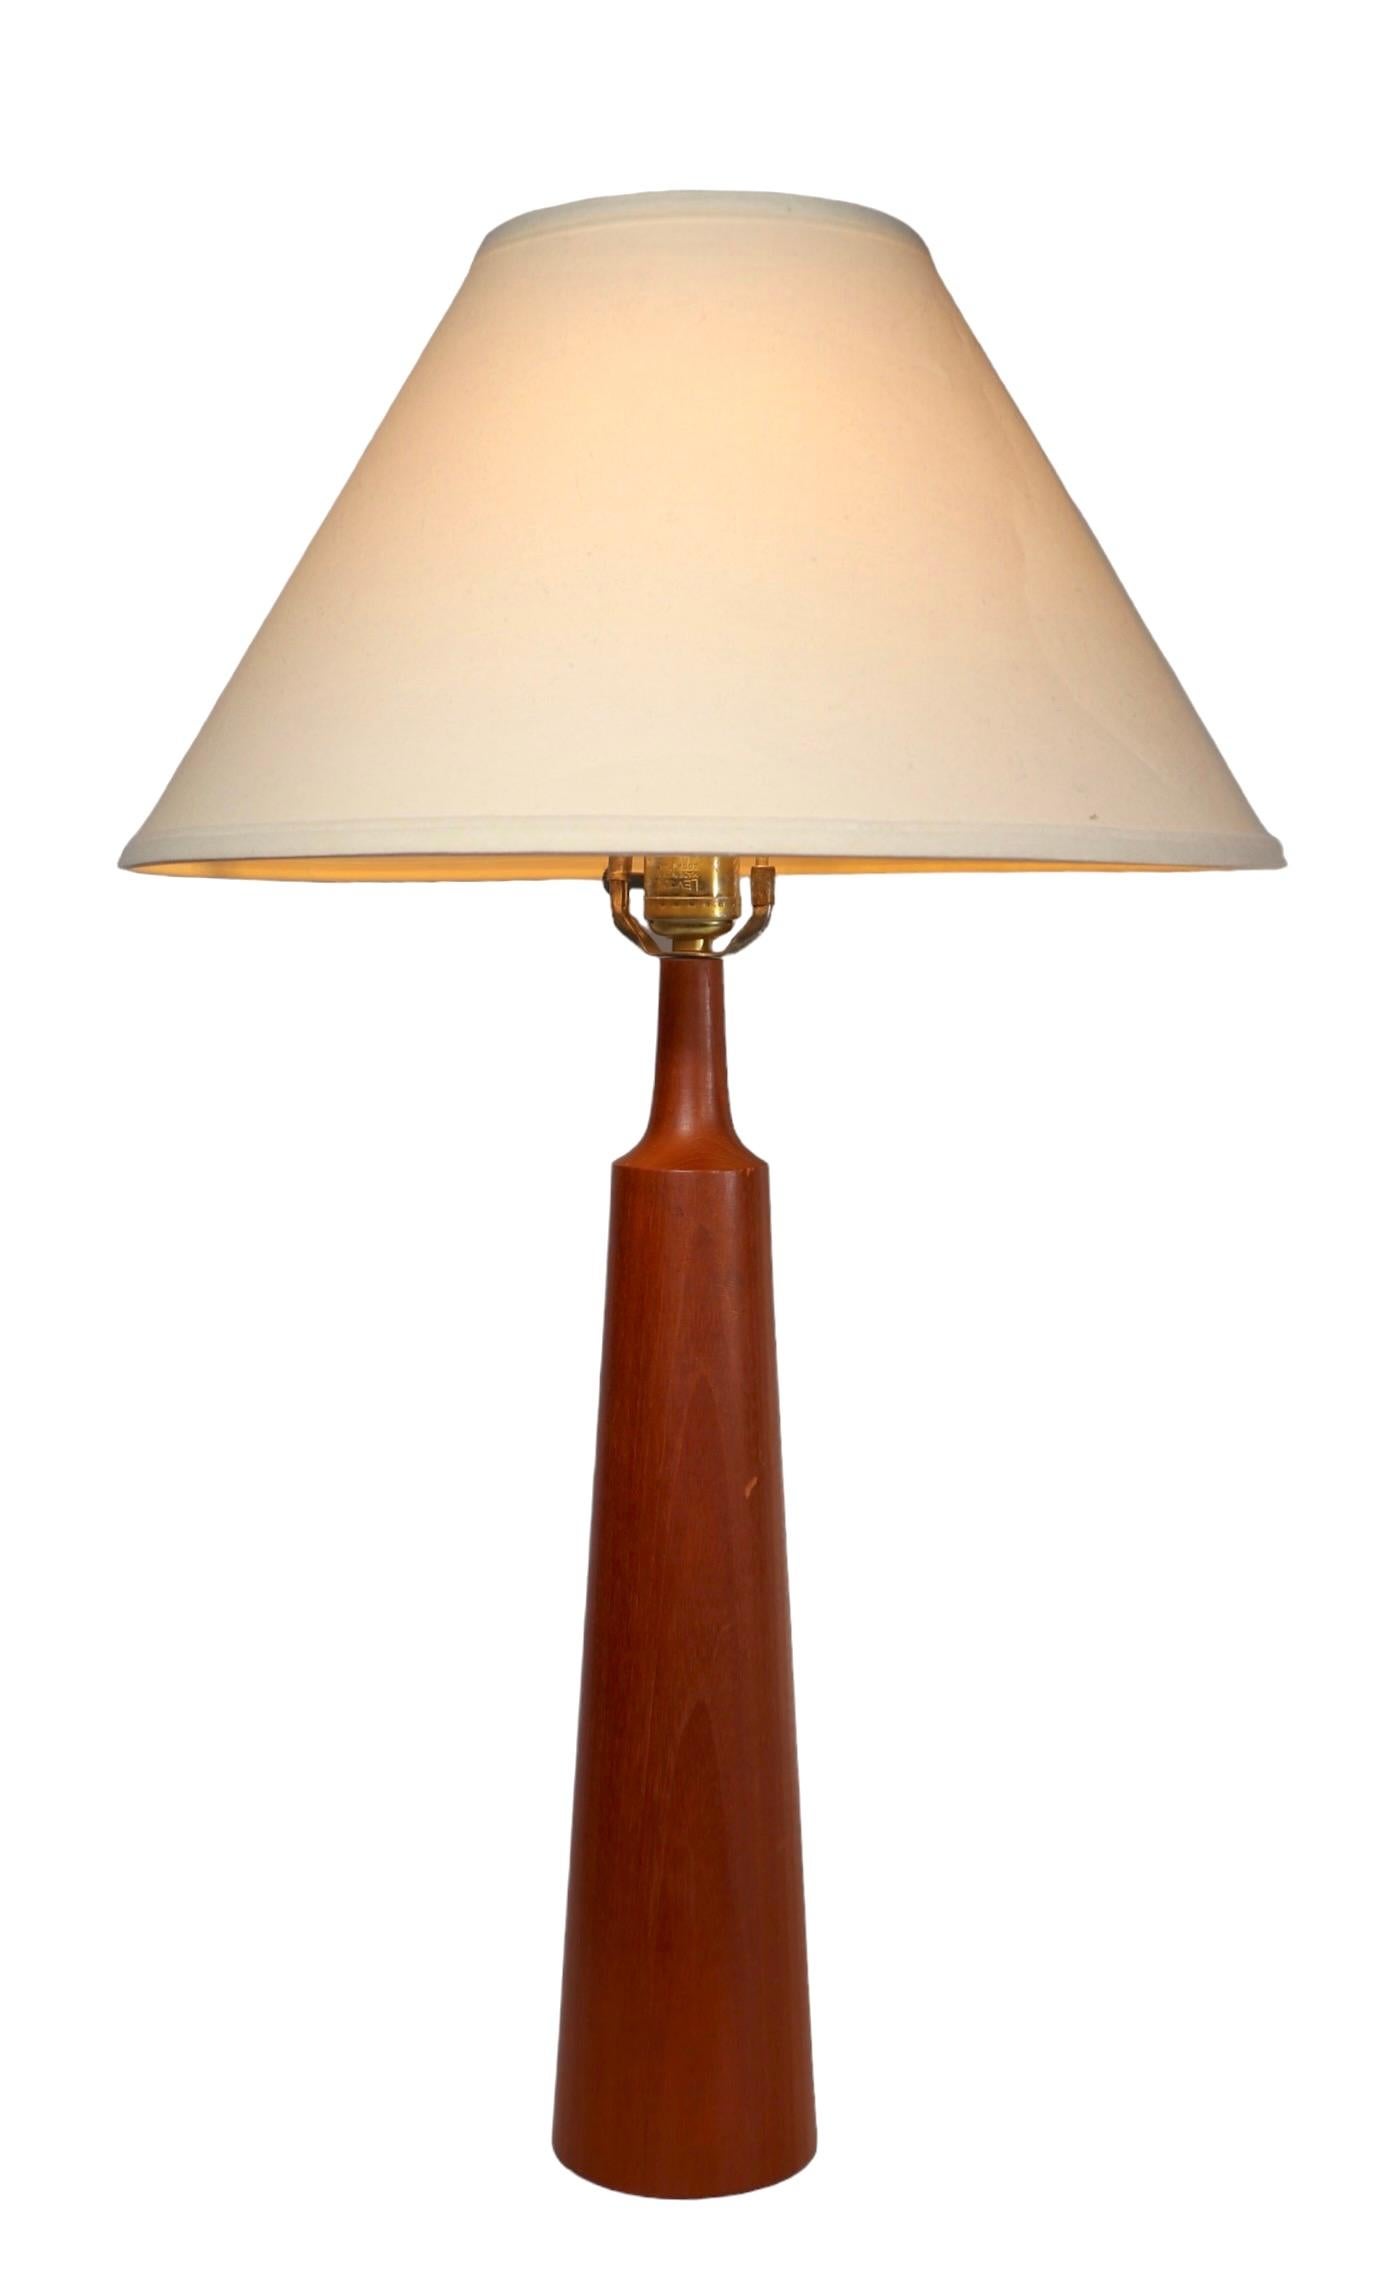 Danish Mid Century Teak Table Lamp c 1950/60’s In Good Condition For Sale In New York, NY